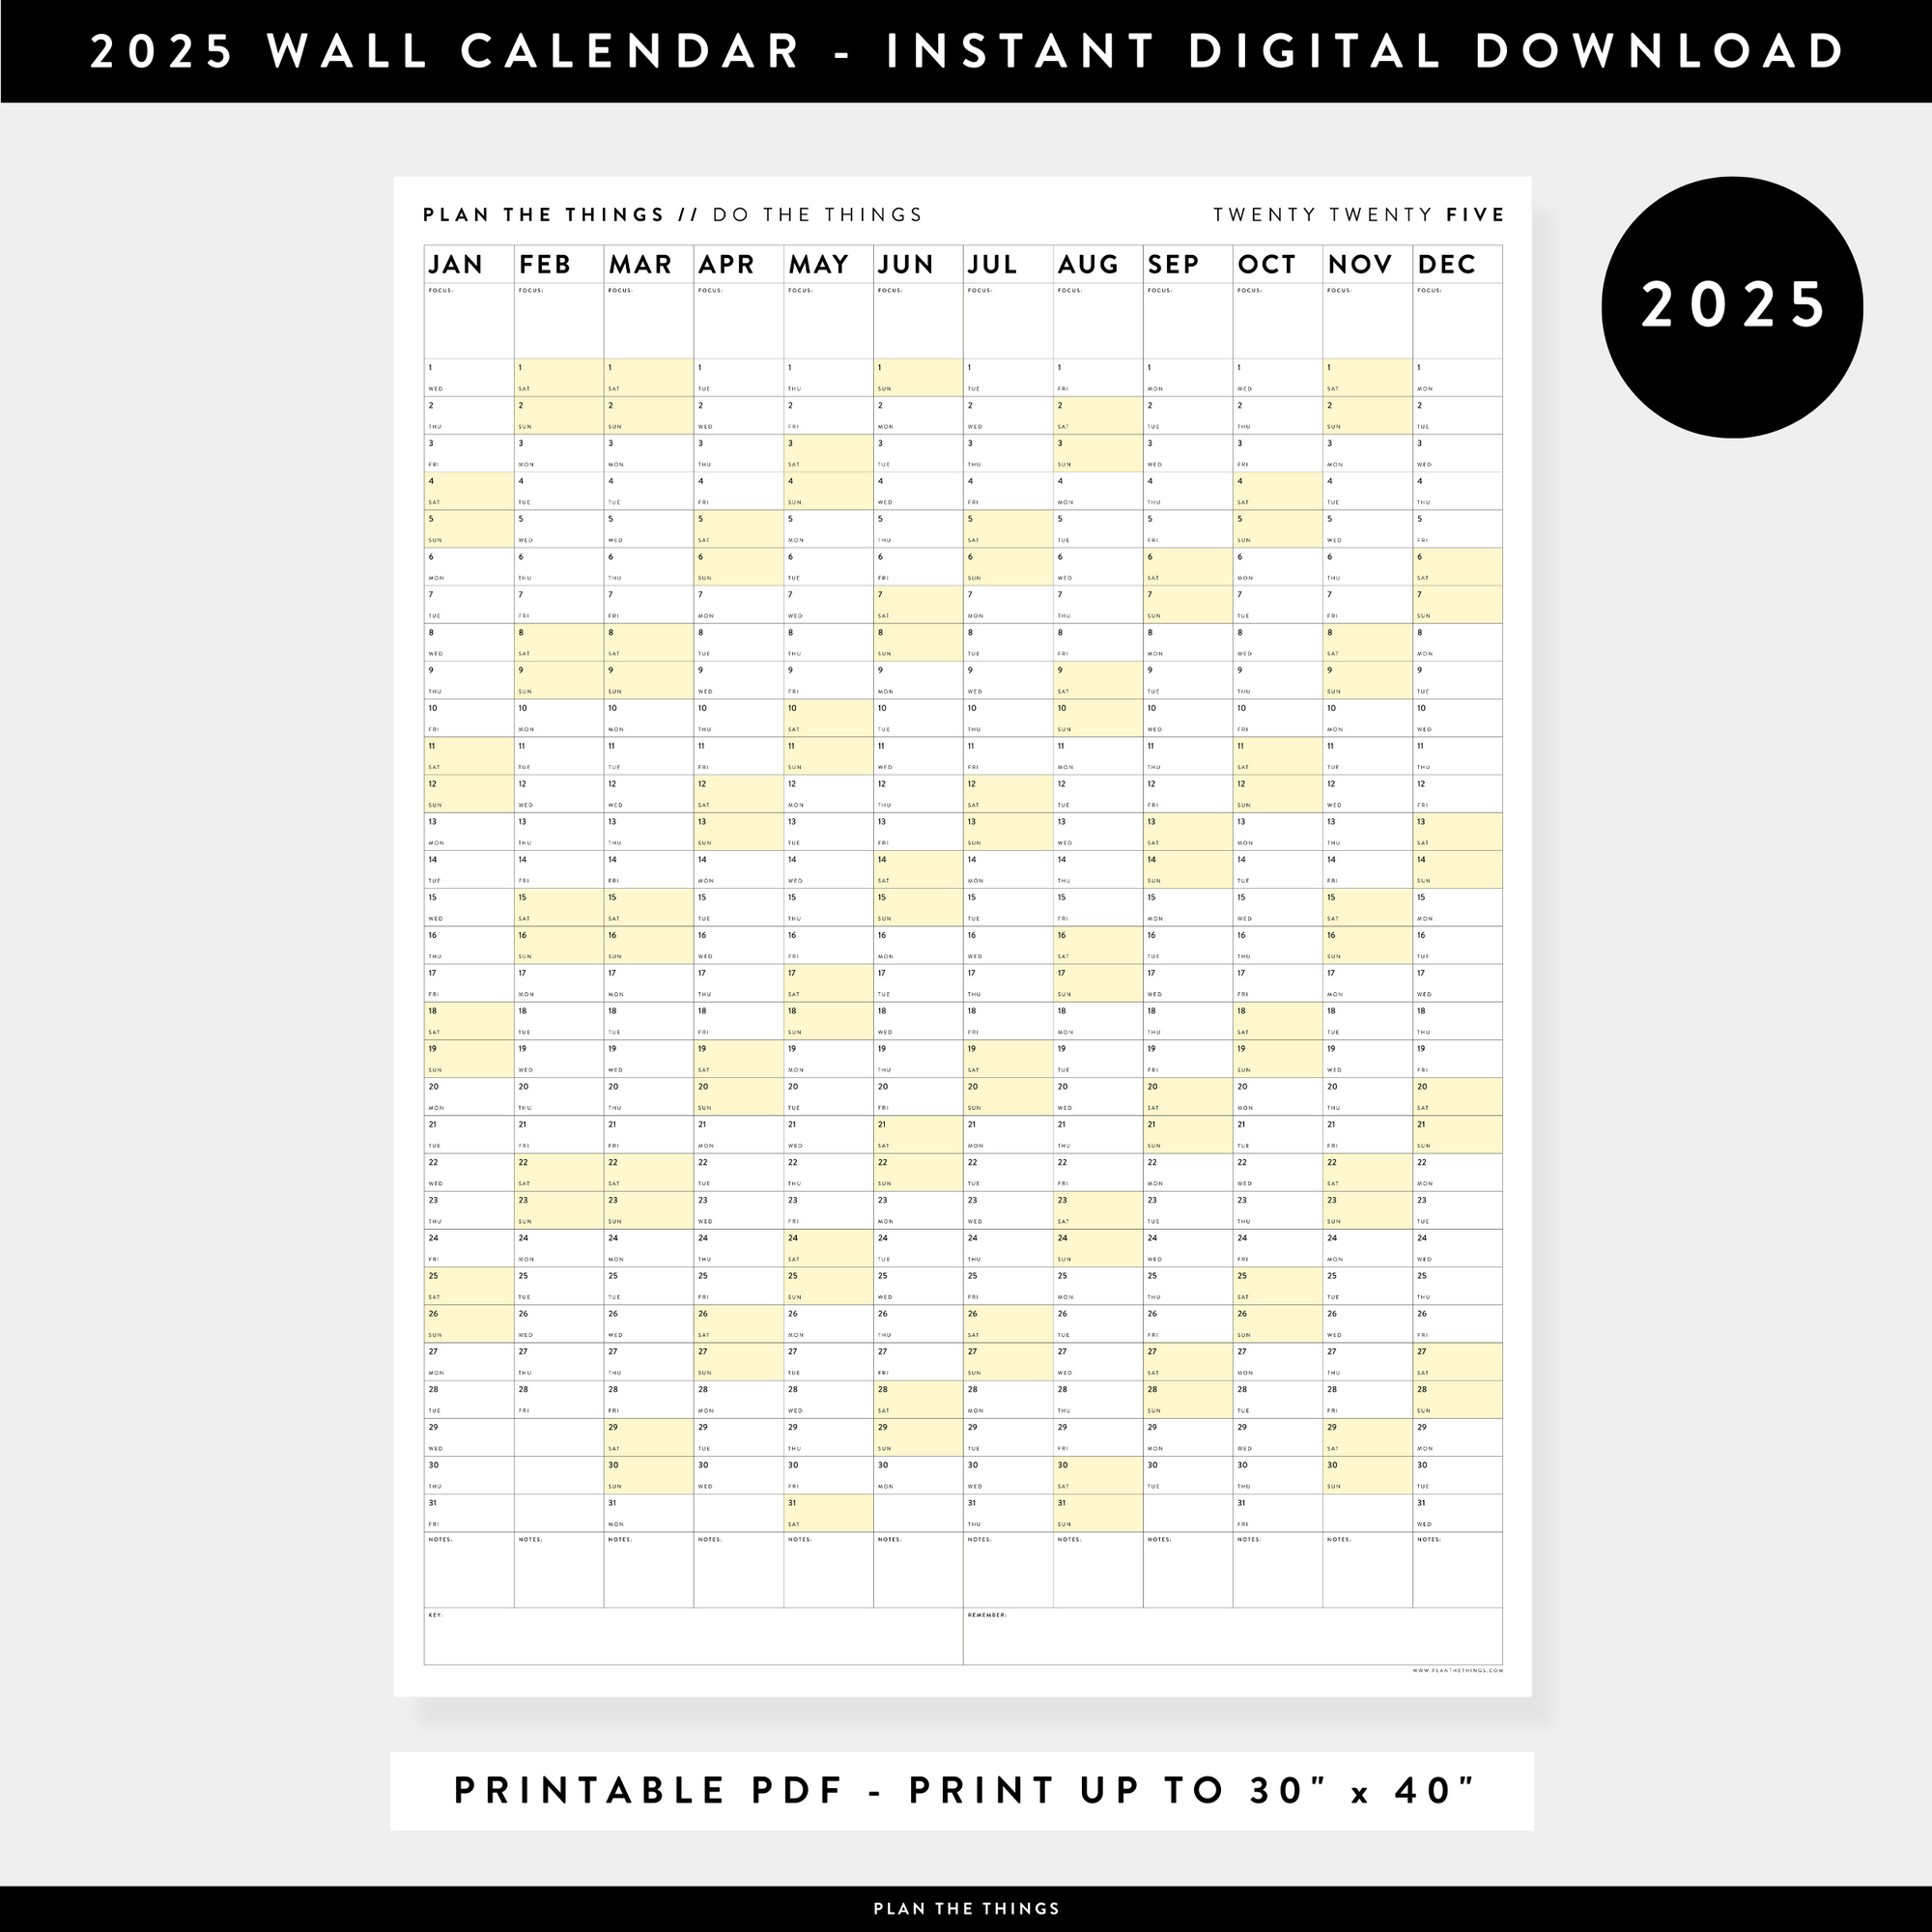 PRINTABLE VERTICAL 2025 WALL CALENDAR WITH YELLOW WEEKENDS - INSTANT DOWNLOAD